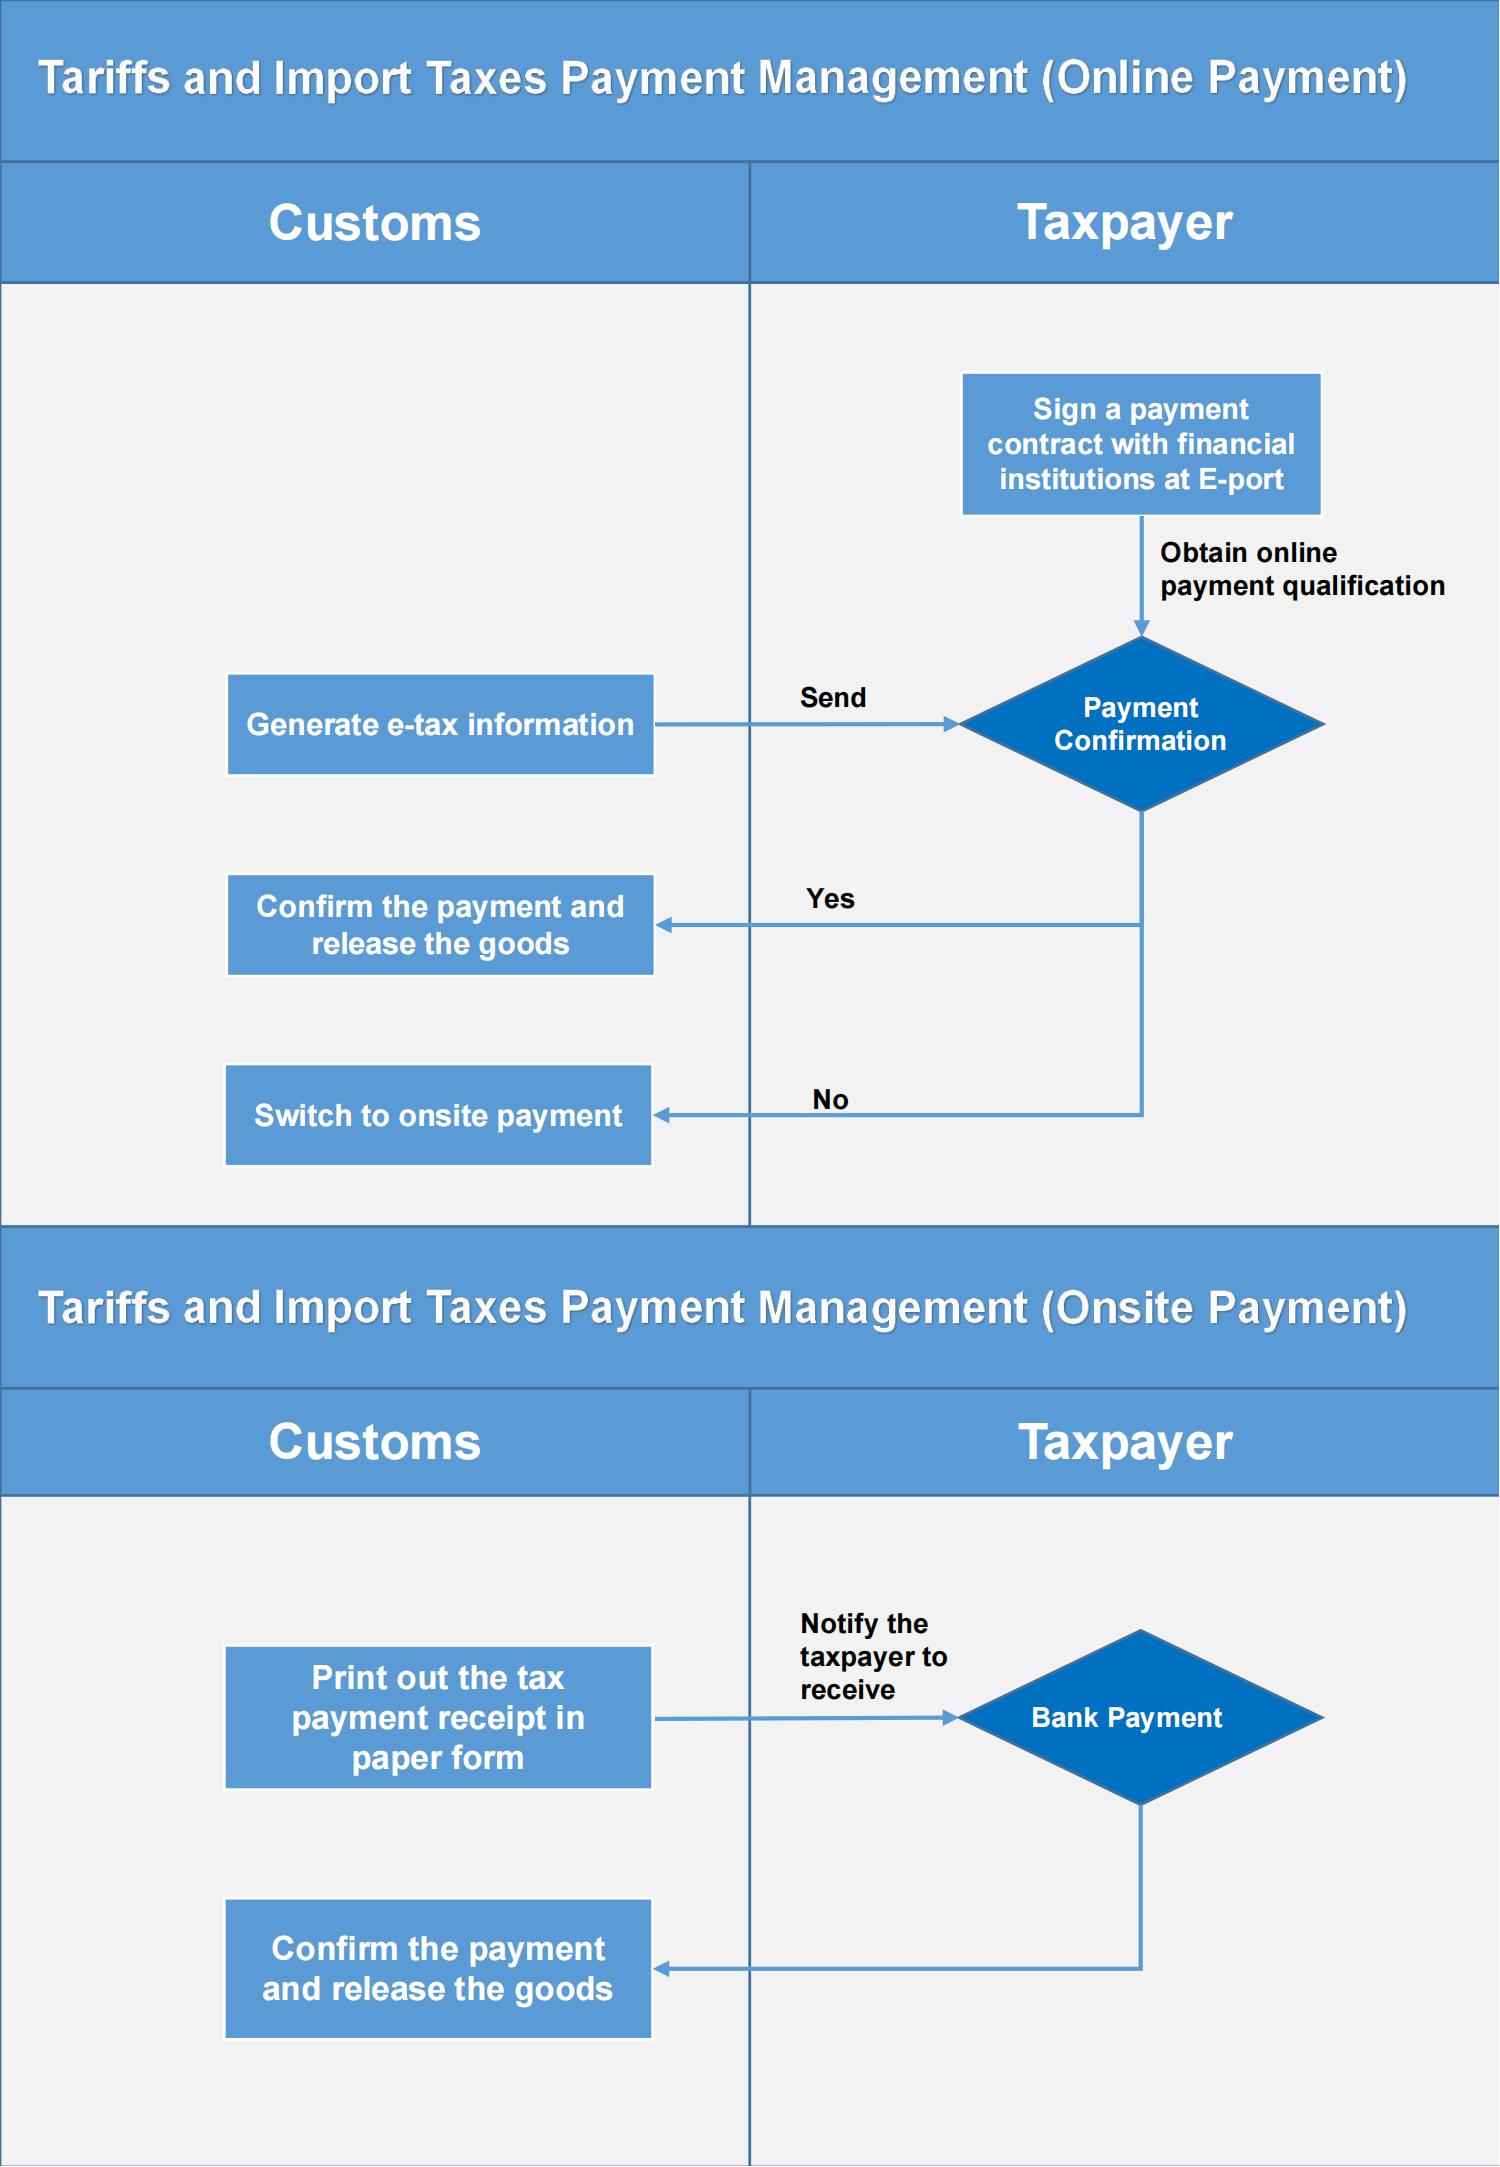 Tariffs and Import Taxes Payment Management.jpg